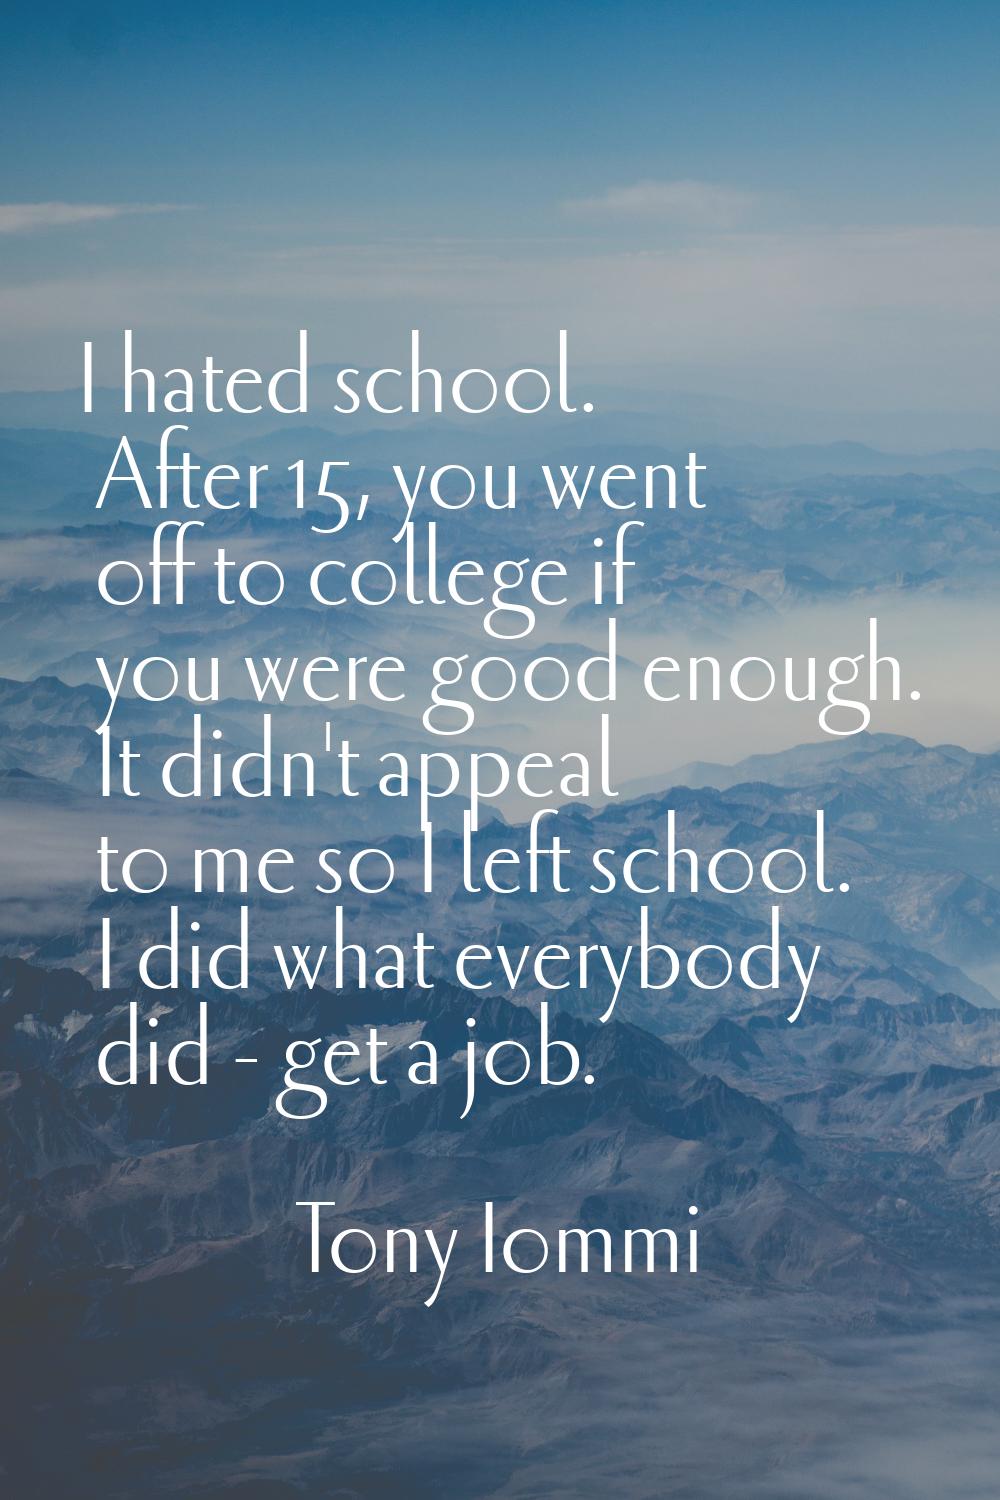 I hated school. After 15, you went off to college if you were good enough. It didn't appeal to me s